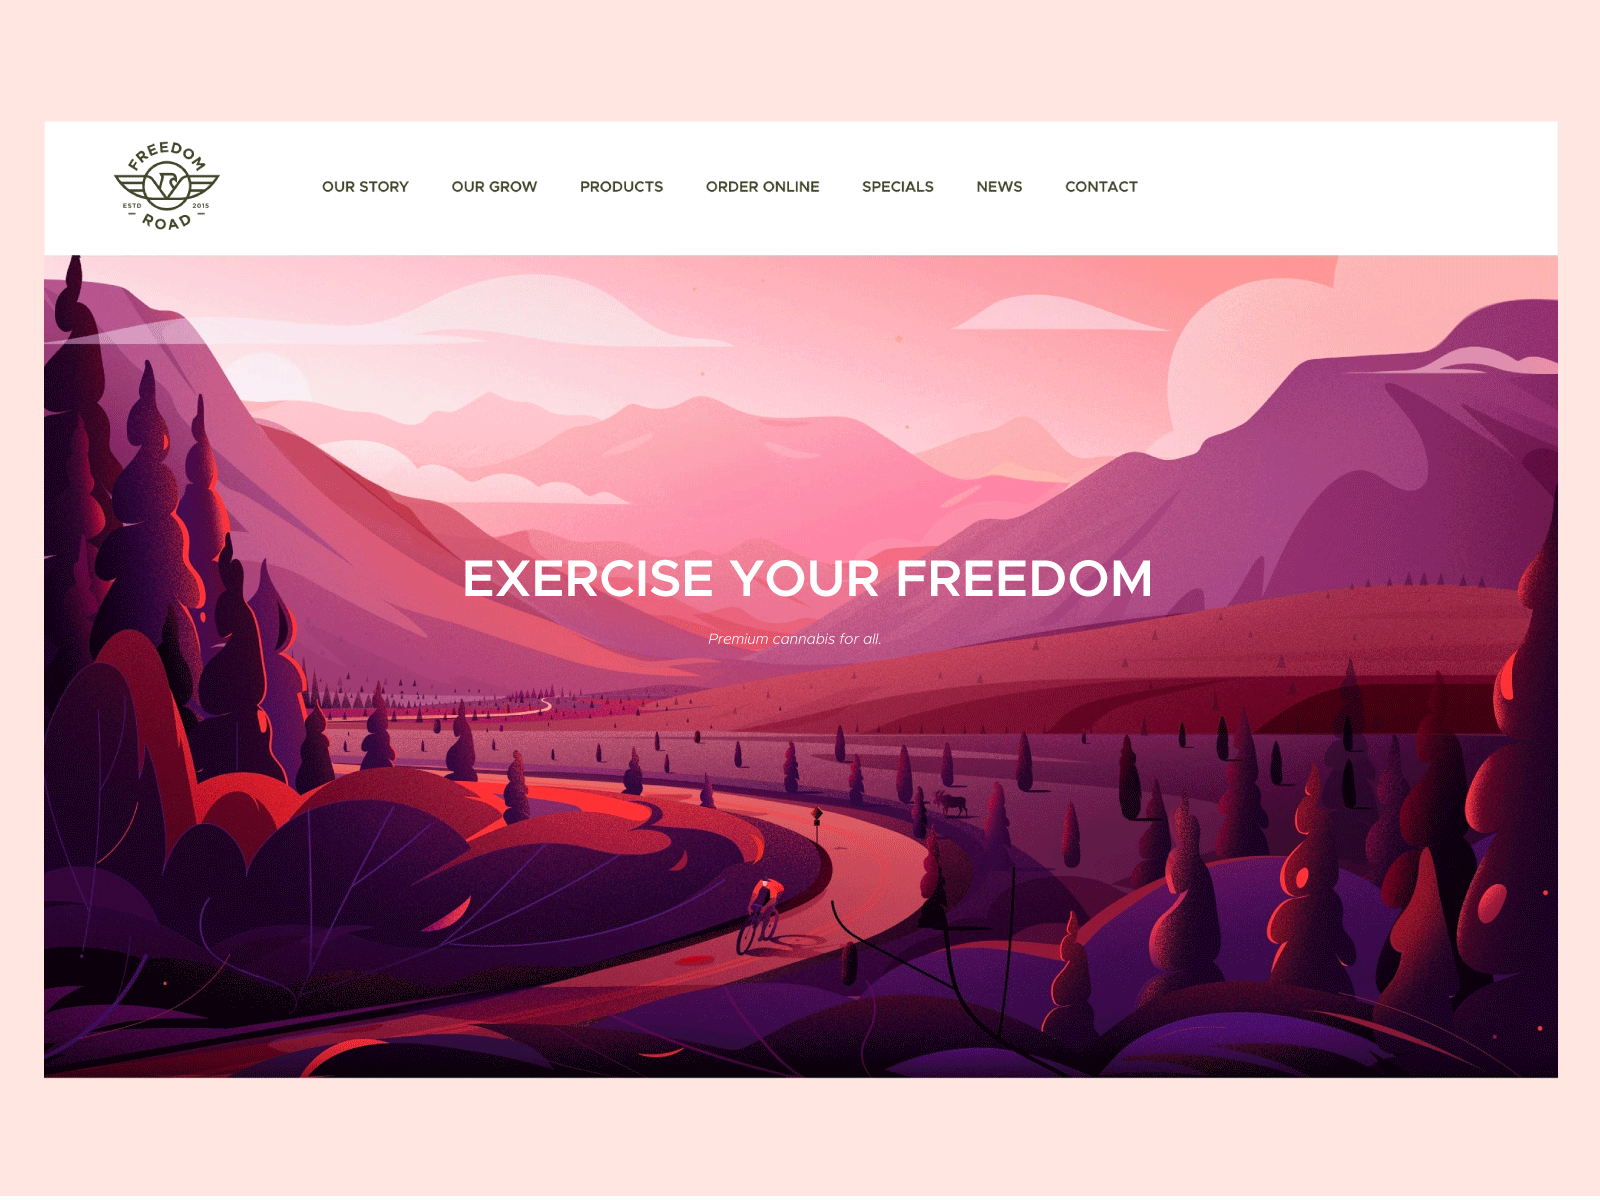 Exercise Your Freedom cannabis eagle hill illustration landscape landscape illustration light mountain nature nature illustration road travel tree trip vector webillustration